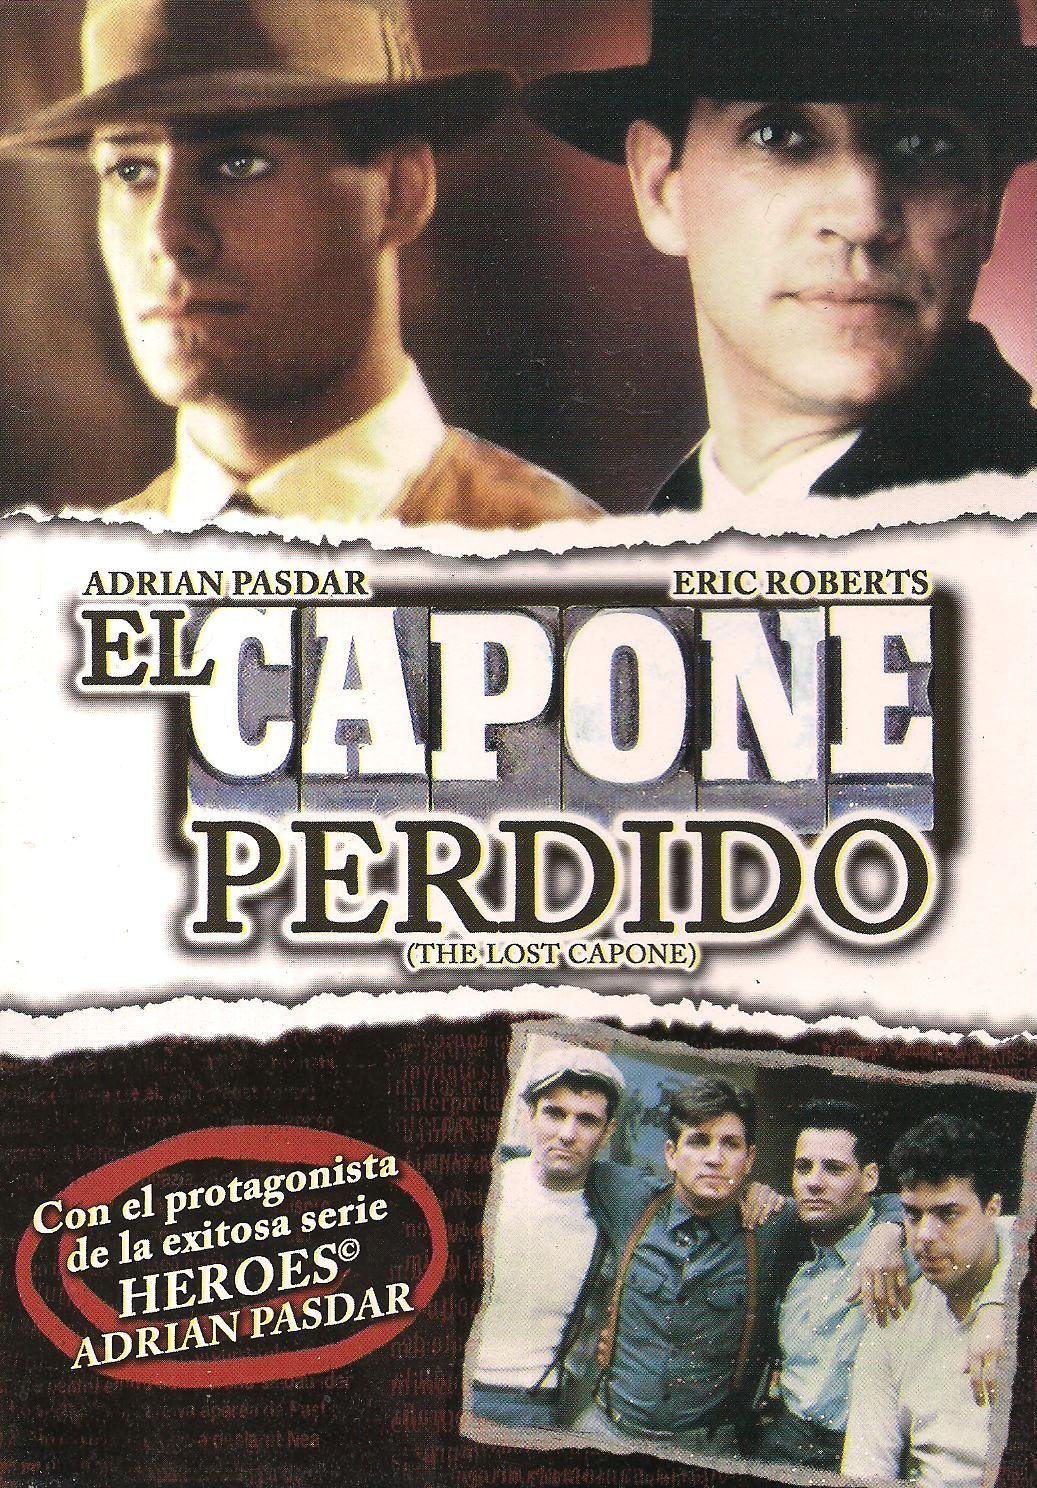 ANTHONY V. CRIVELLO, ERIC ROBERTS, ADRIAN PSDAR and TITUS WELLIVER on the cover of the Spanish poster for 